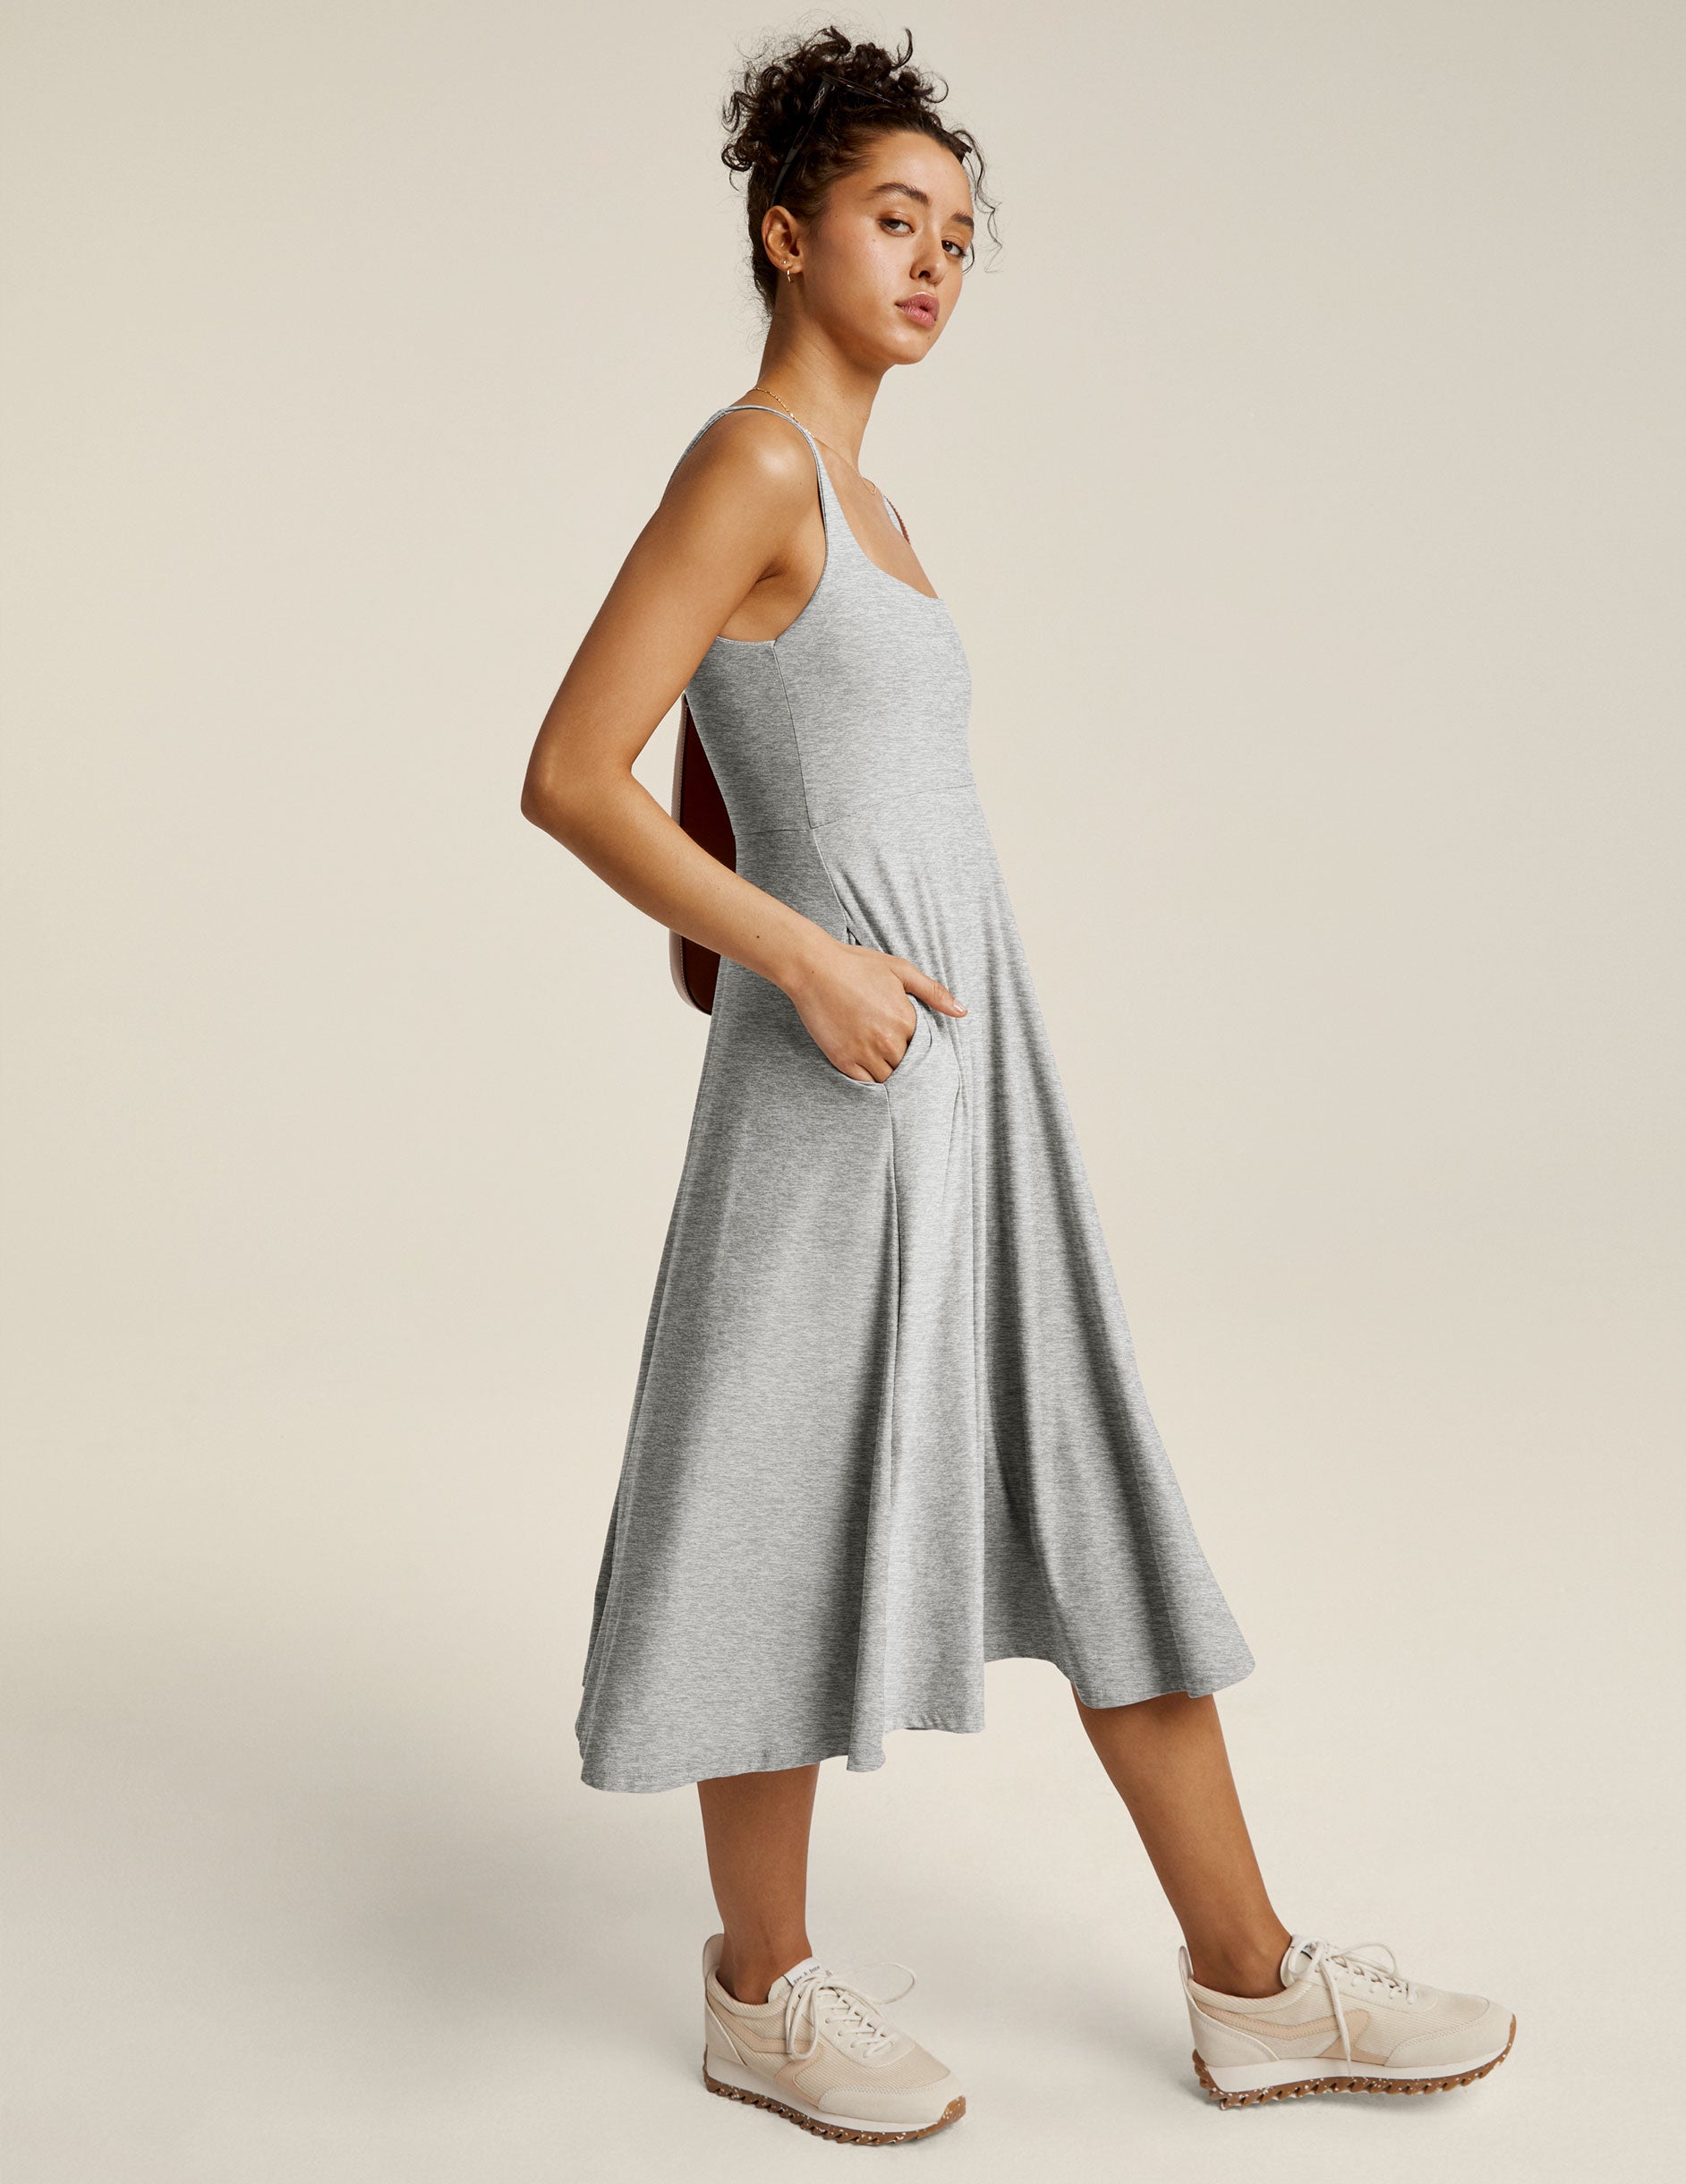 Beyond Yoga Featherweight At The Ready Square Neck Dress Small NWT DR-1193